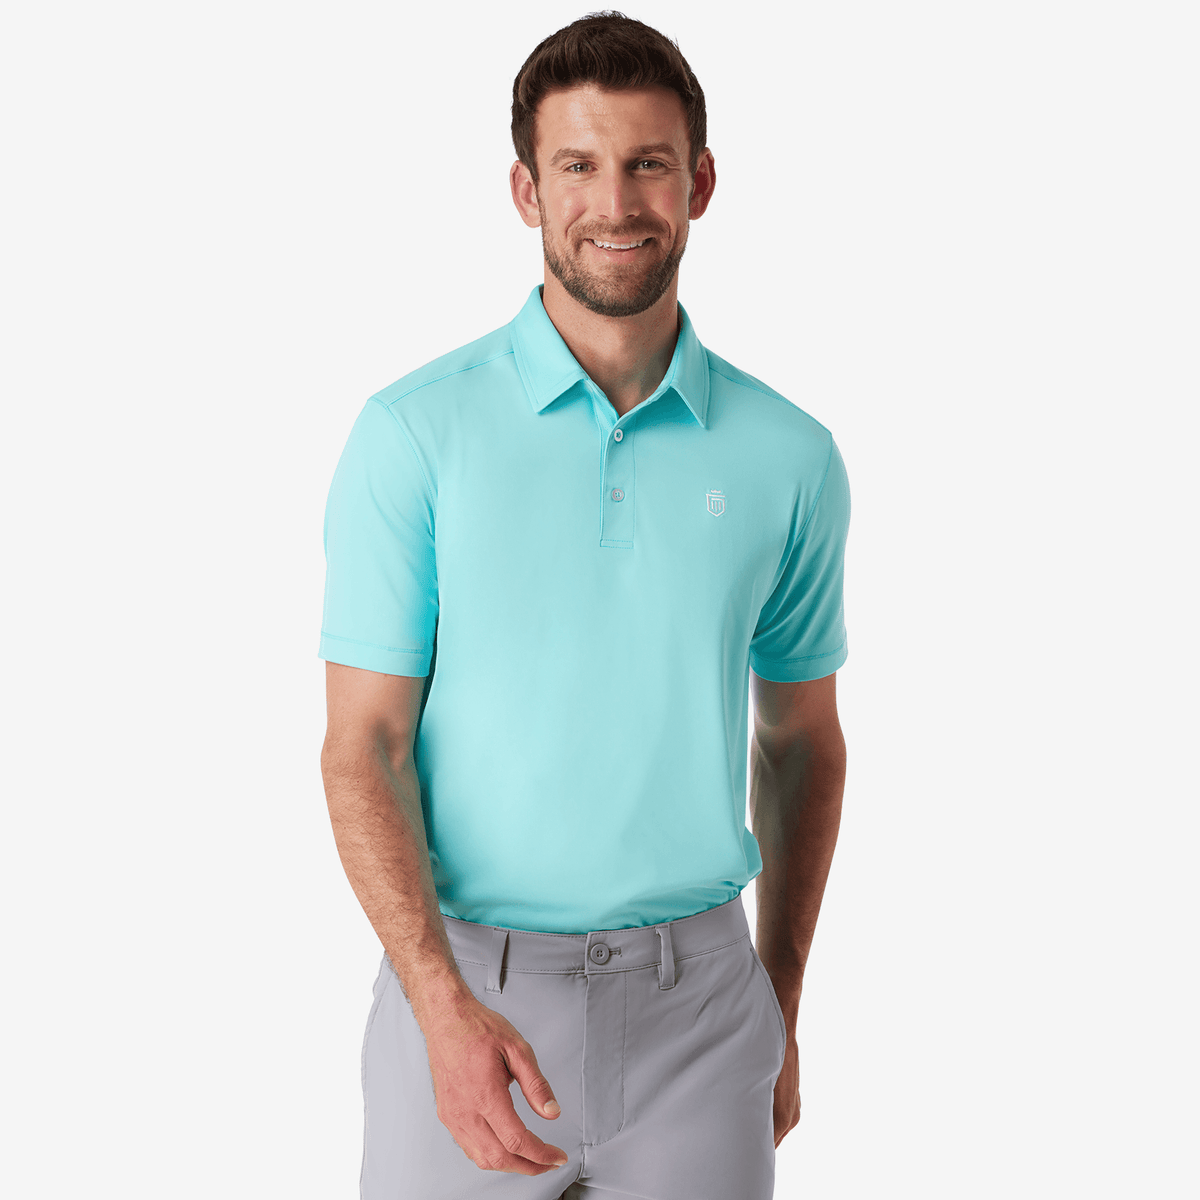 Athletic Tech Polo Blue Turq – Greatness Wins